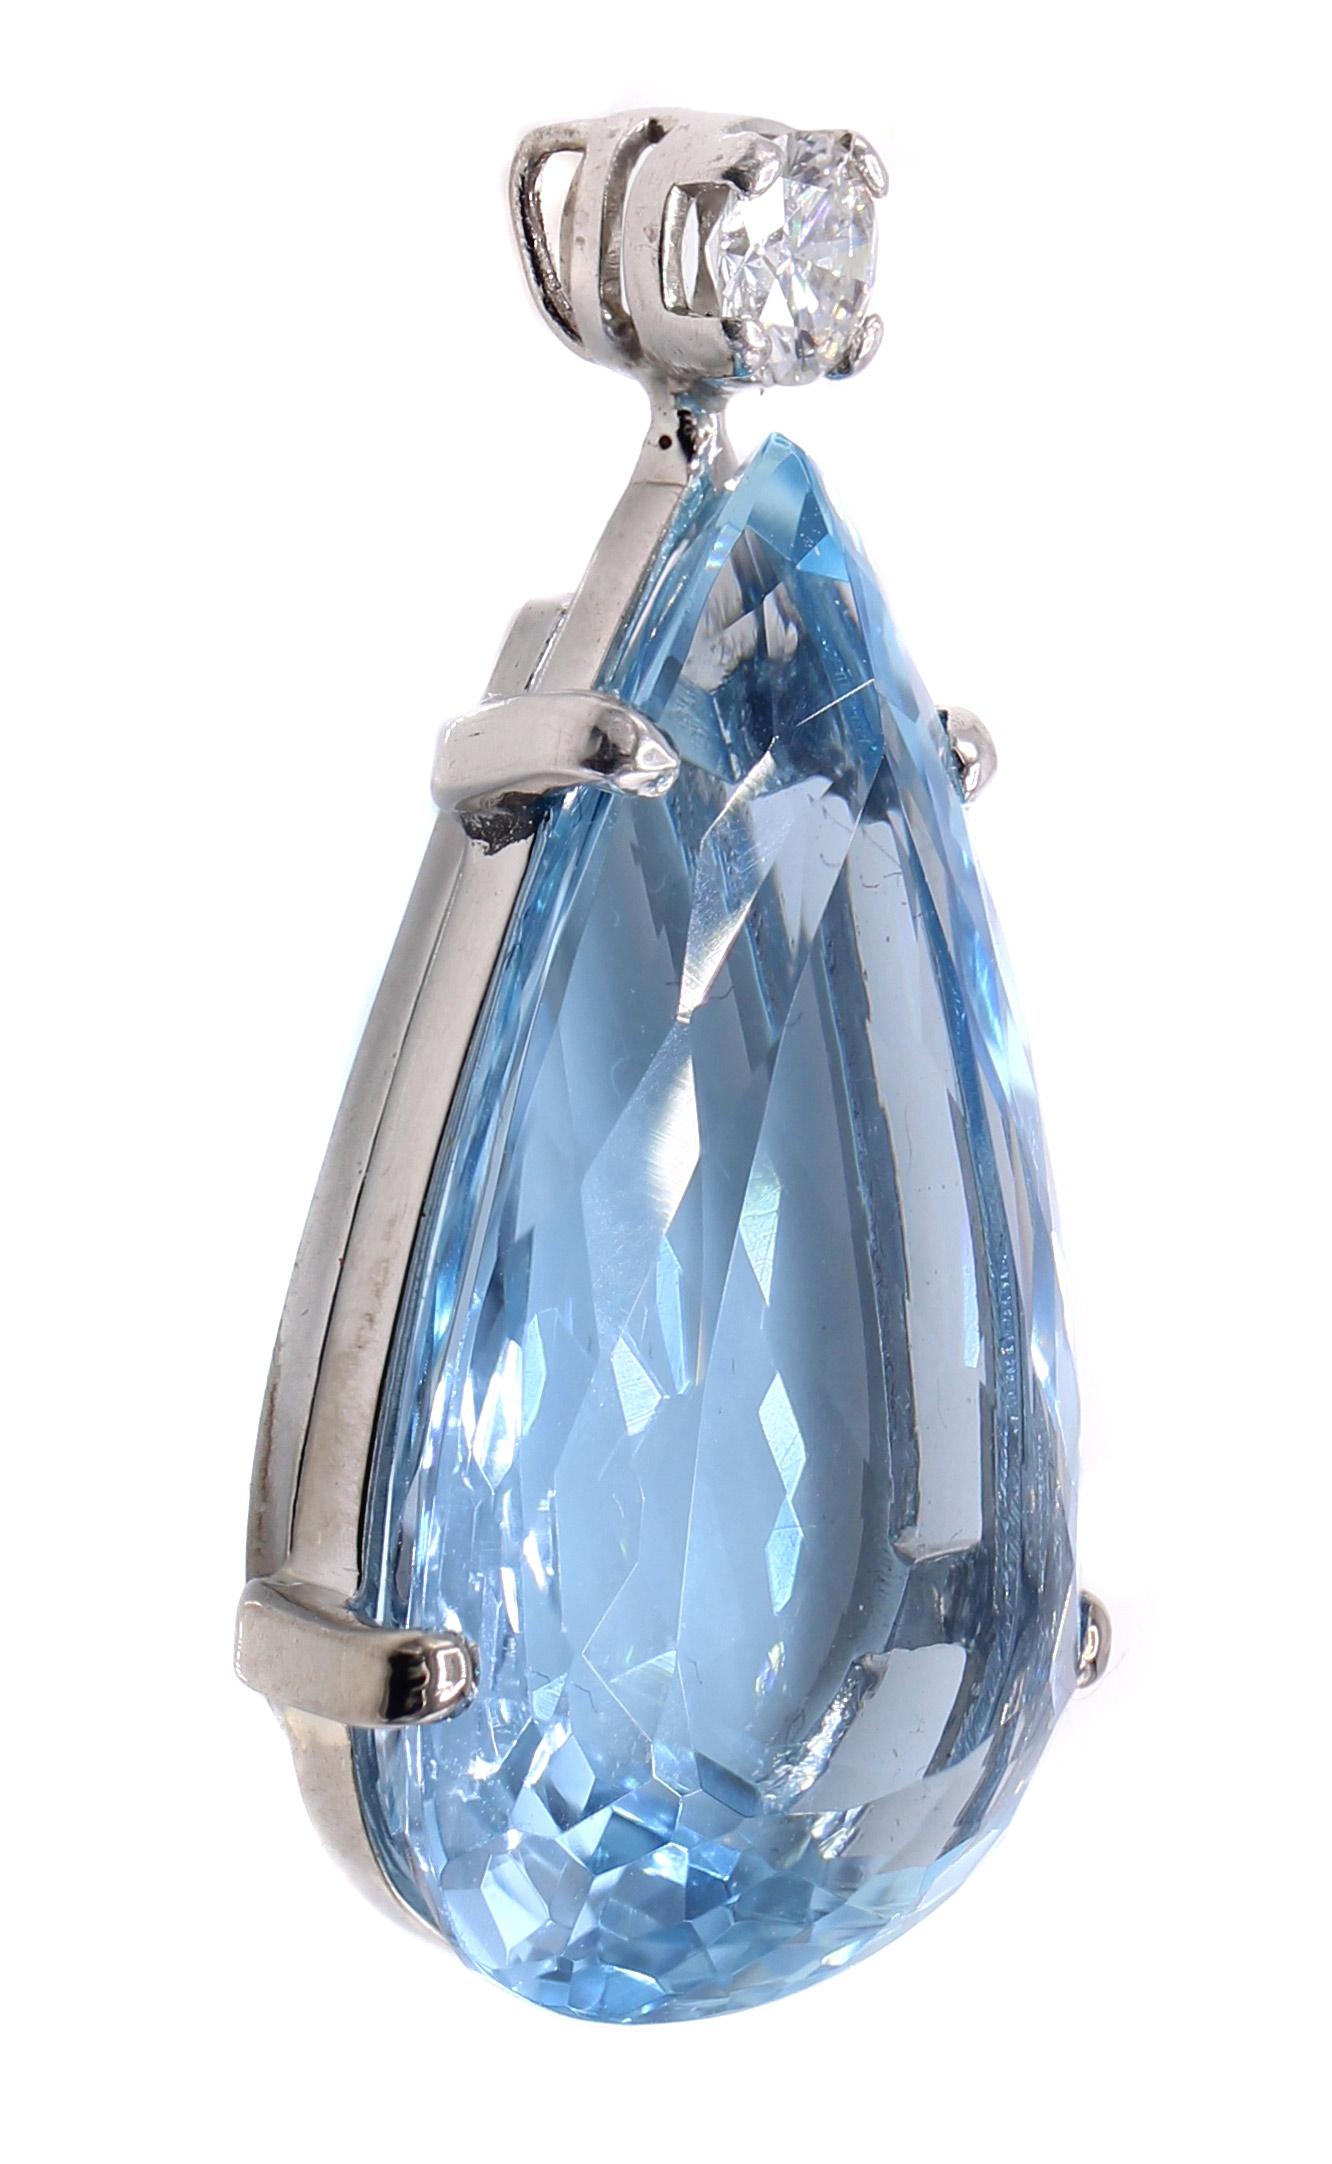 20.82 Carat Aquamarine Diamond 18 Karat White Gold Pendant Necklace In Good Condition For Sale In New York, NY